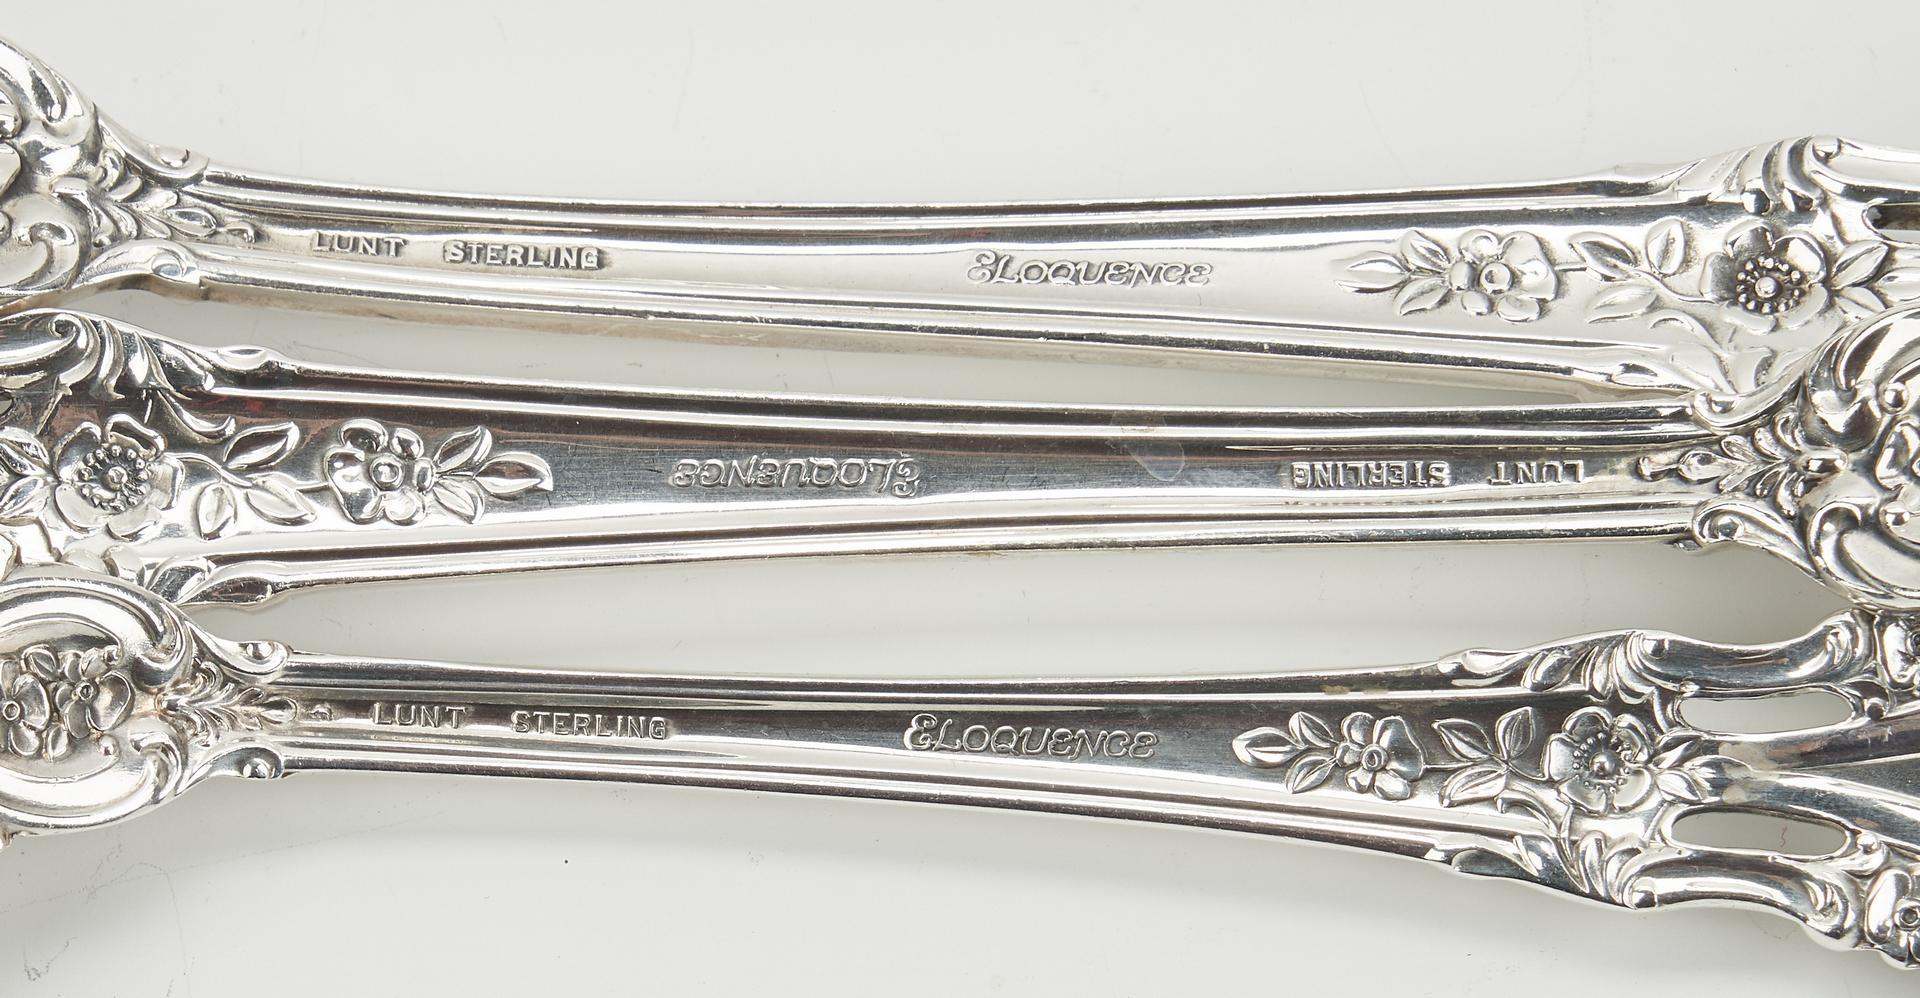 157 Pcs. Lunt Eloquence Pattern Sterling Silver Flatware - Image 11 of 17